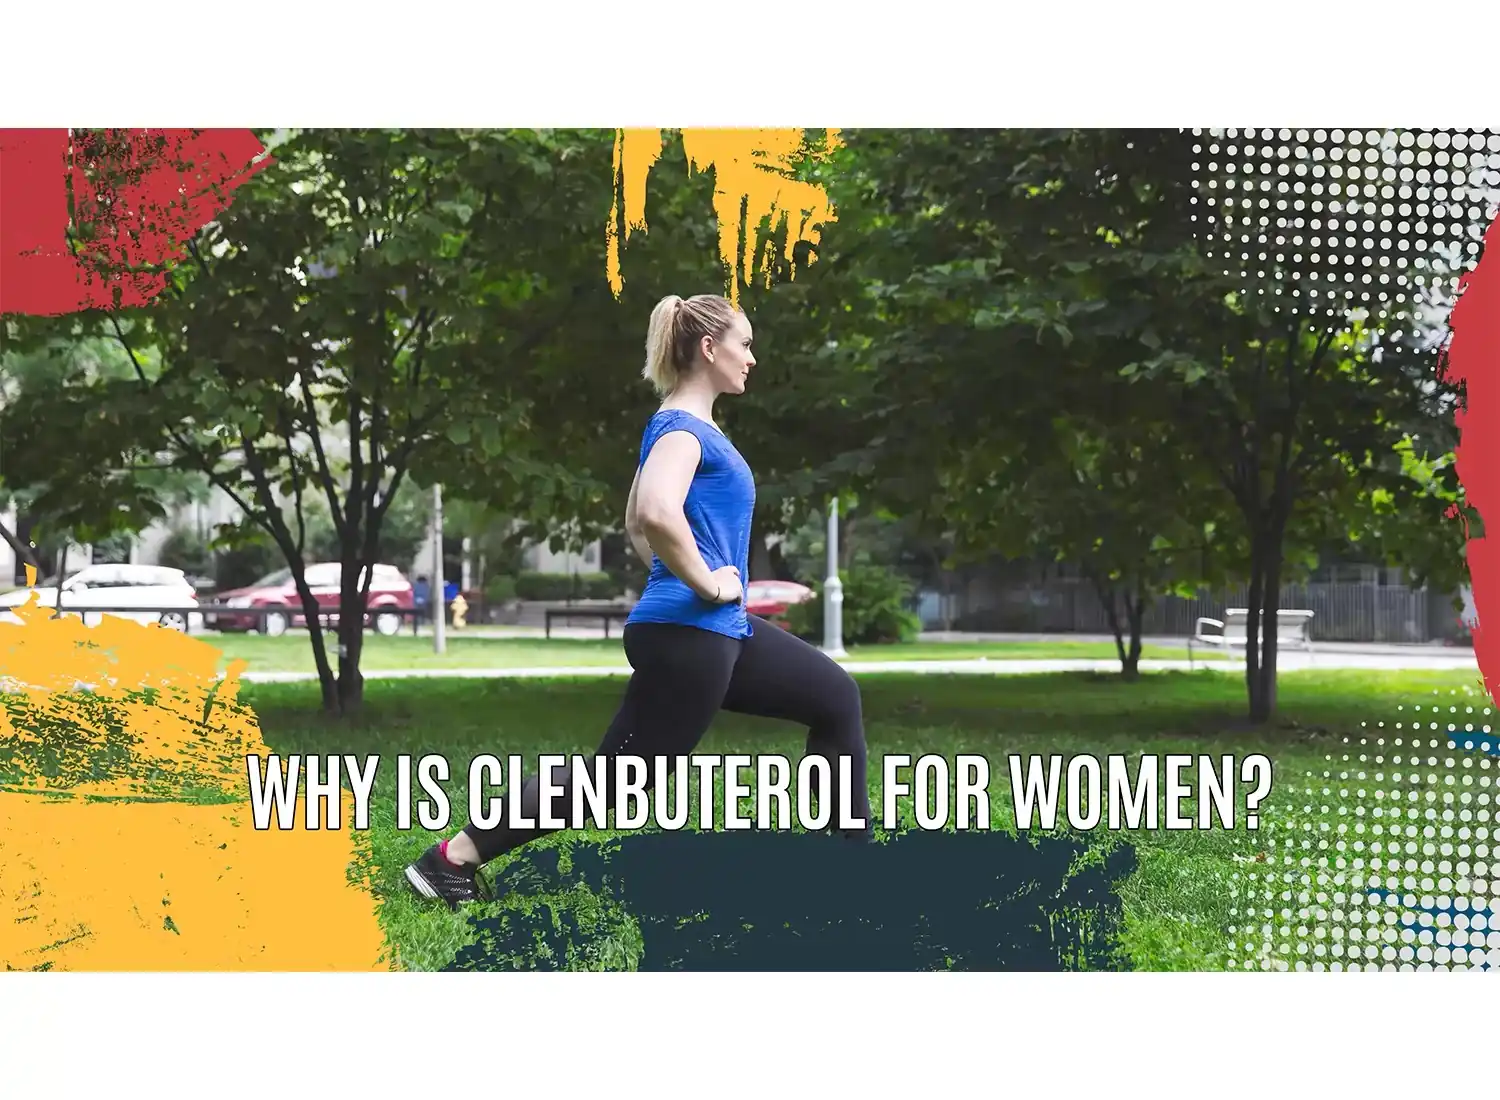 Why is Clenbuterol for women